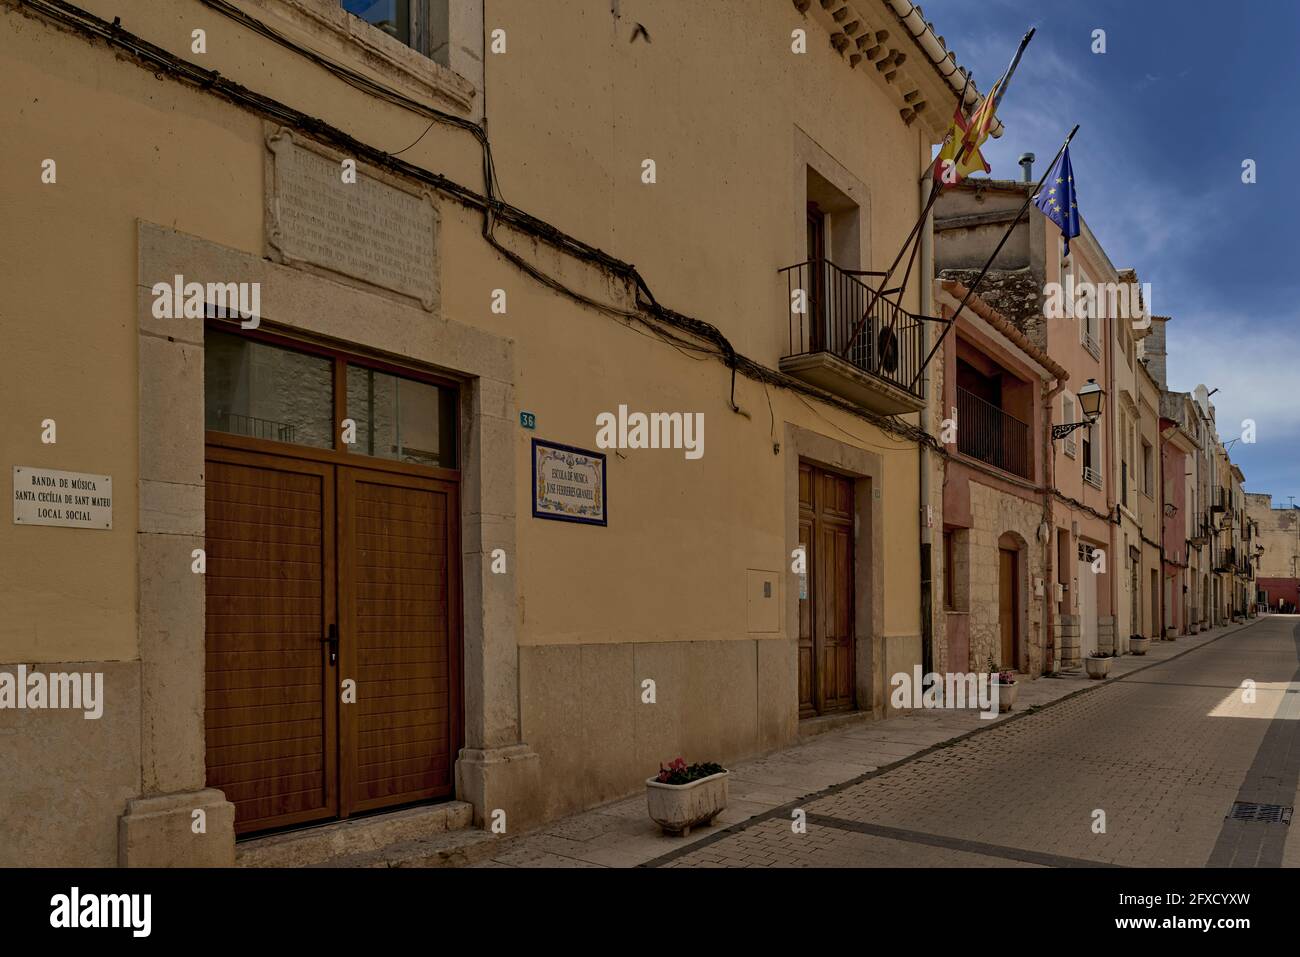 exterior of the music school building in the rural town of San Mateo in the province of Castellon, Spain, Europe Stock Photo